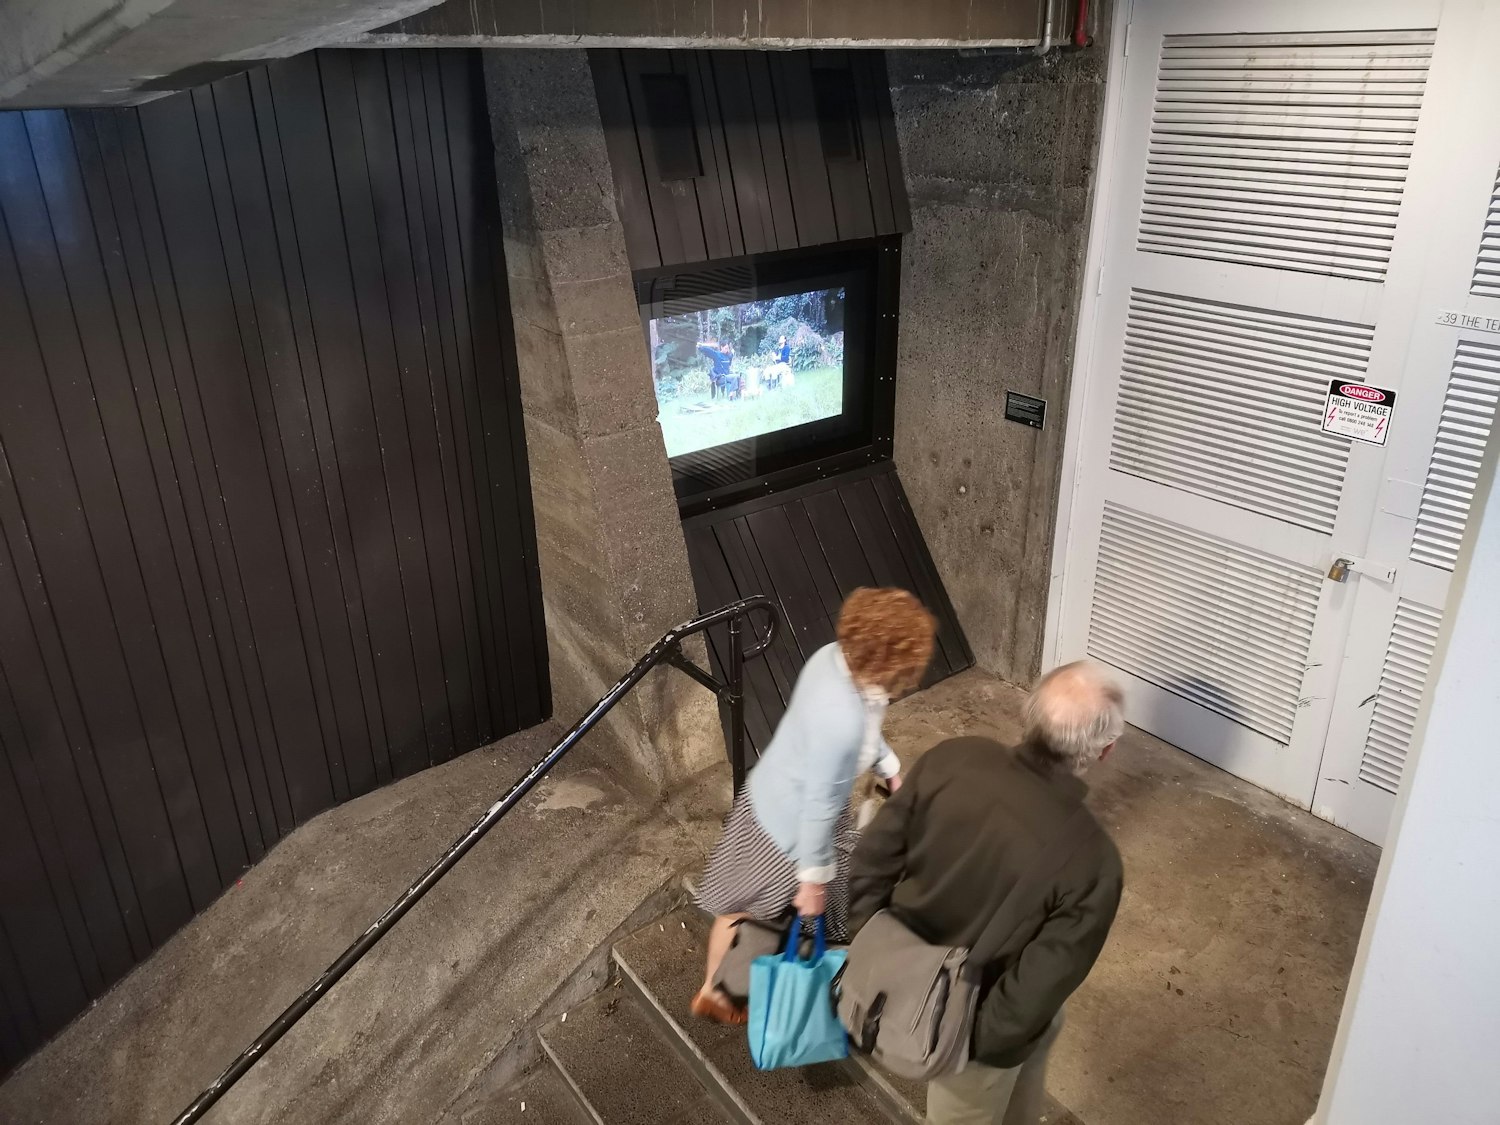 Two people are walking up the steps of Mason Lane, a central city laneway between The Terrace and Lambton Quay. They are walking past Masons Screen which is displaying a video work by Arapeta Ashton and Wai Ching Chan.